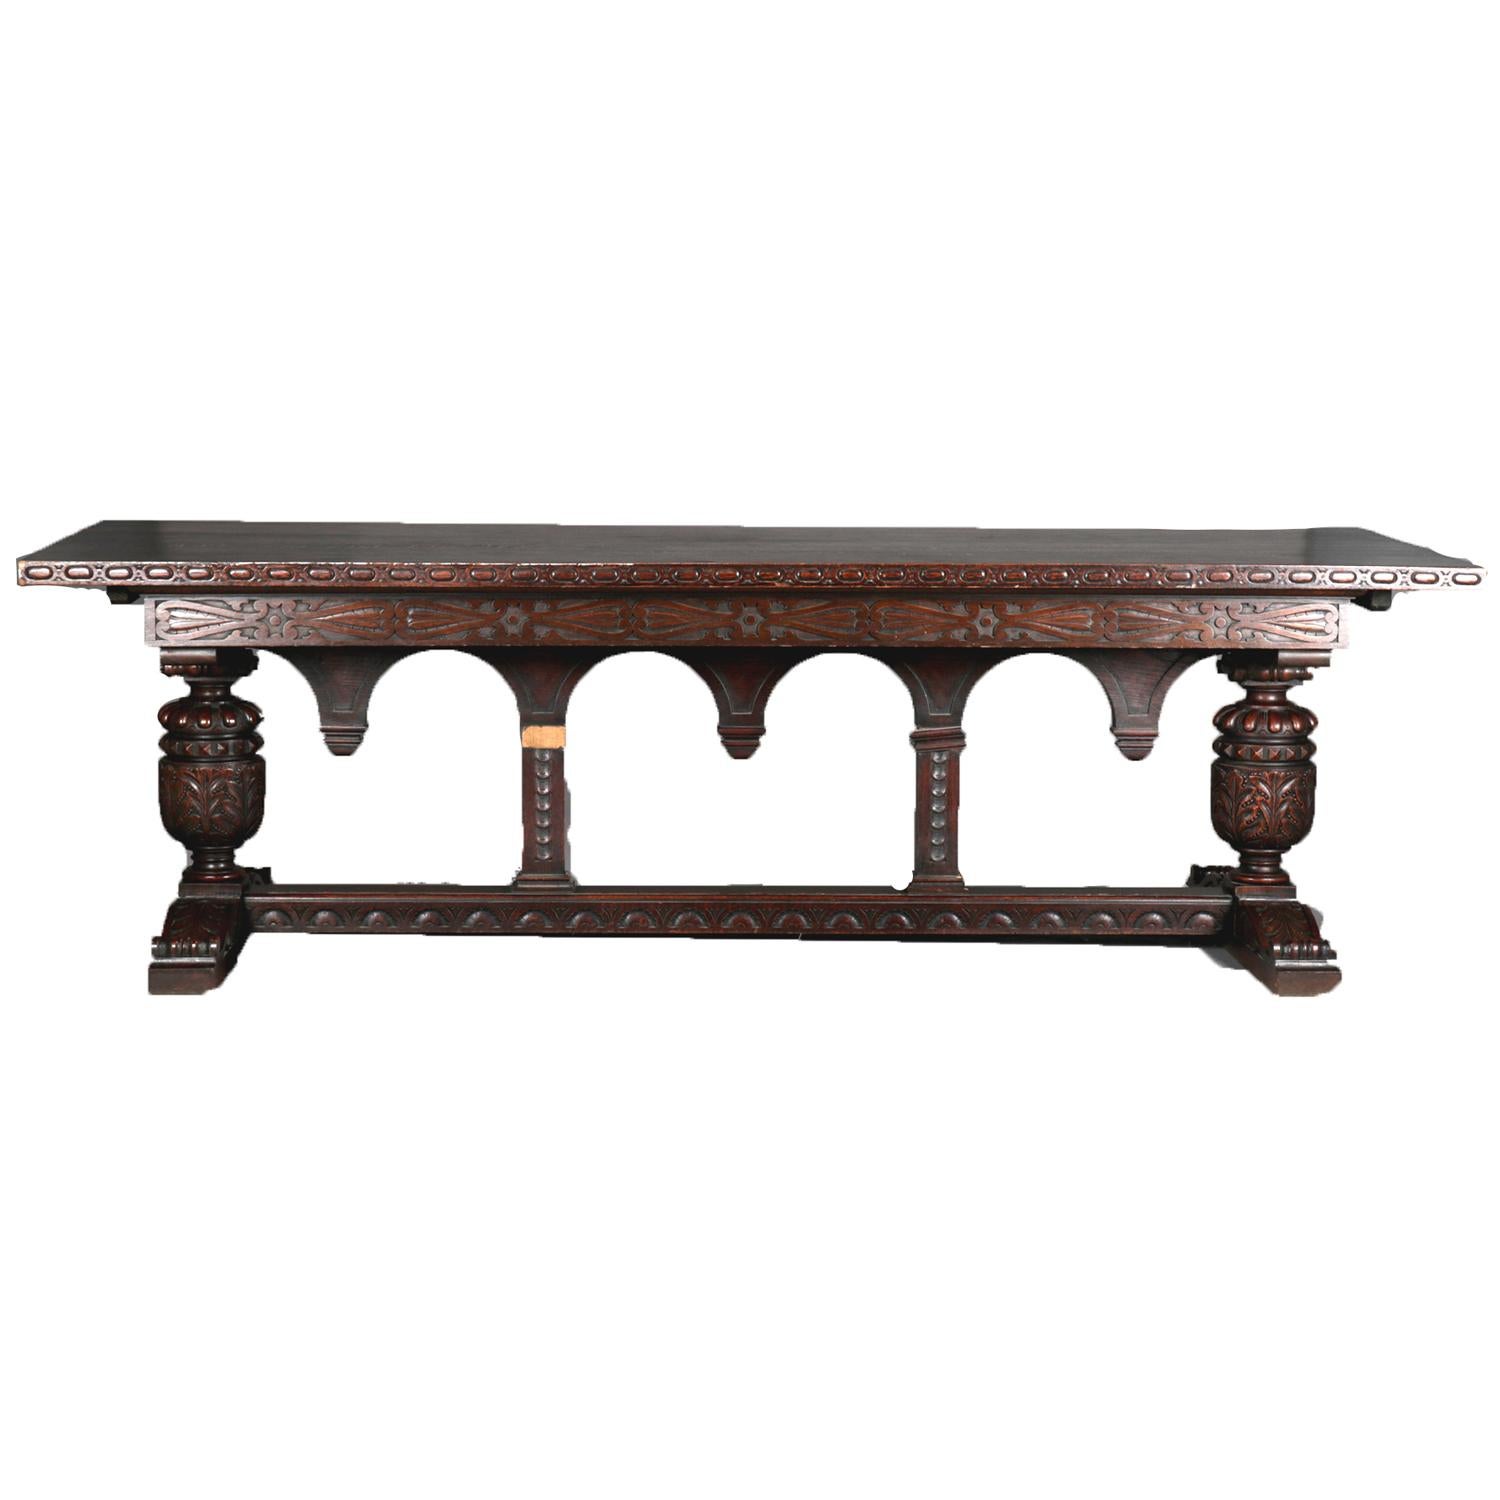 Oversized antique Jacobean trestle dining or conference table features oak construction with top having carved edge decoration above carved scroll caved skirt and supported by acanthus trestle legs flanking supporting legs interspaced with carved